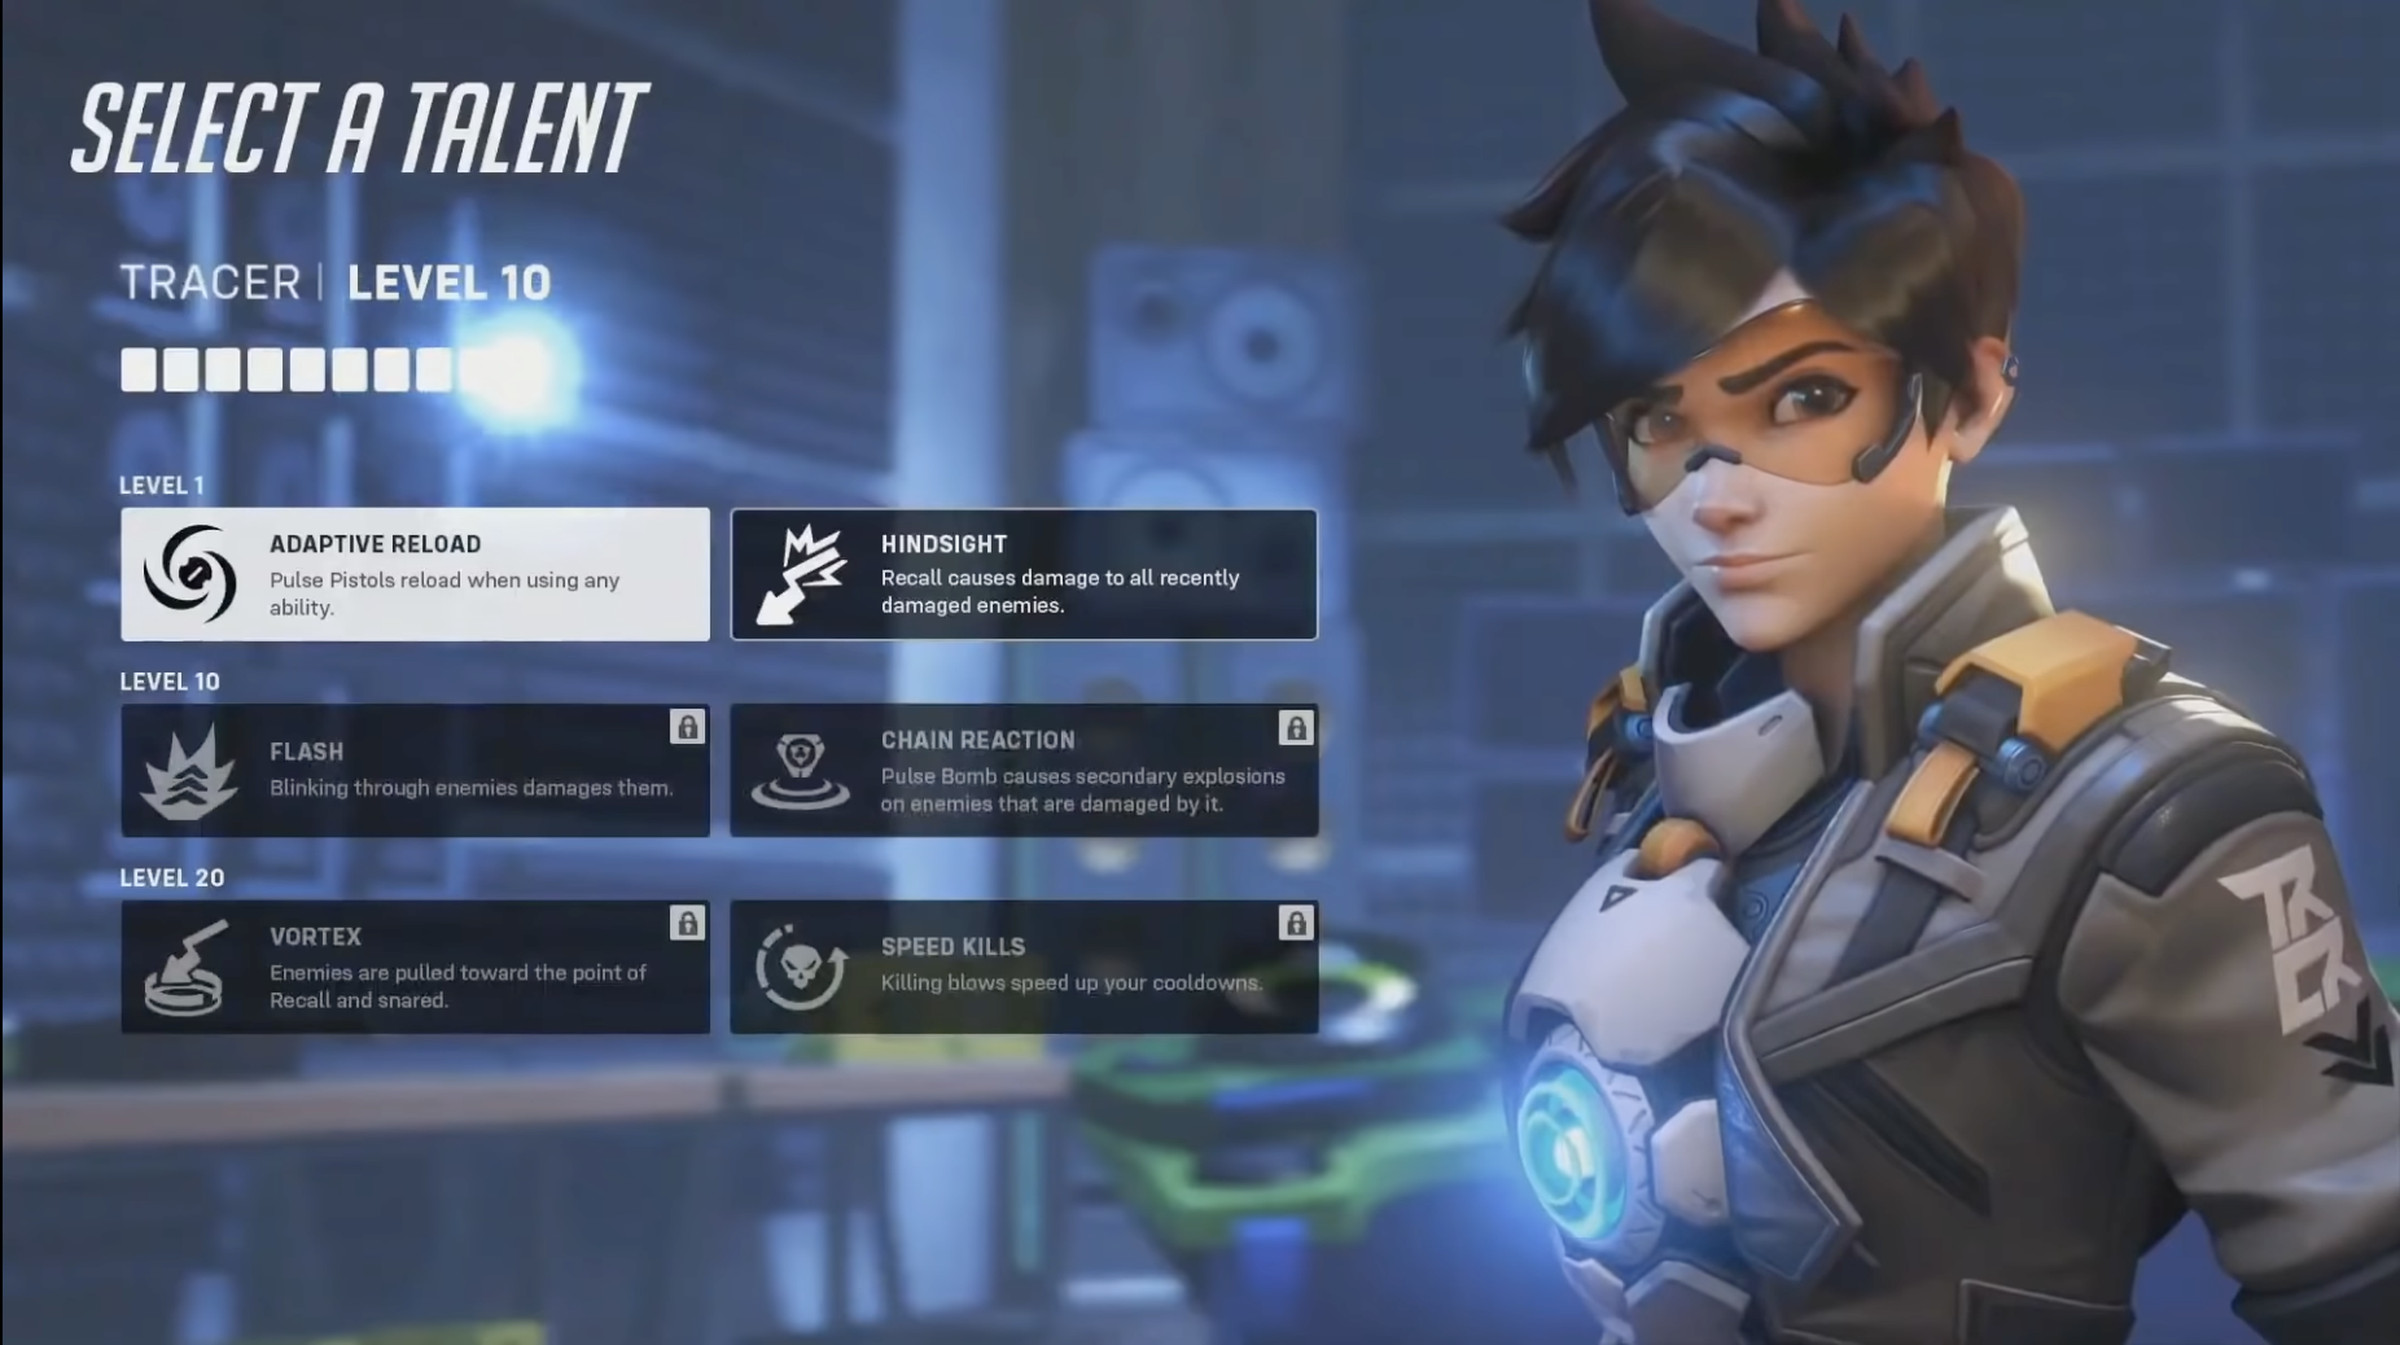 Screenshot from Overwatch 2’s Blizzcon 2019 presentation featuring the hero Tracer and talents used to modify her abilities